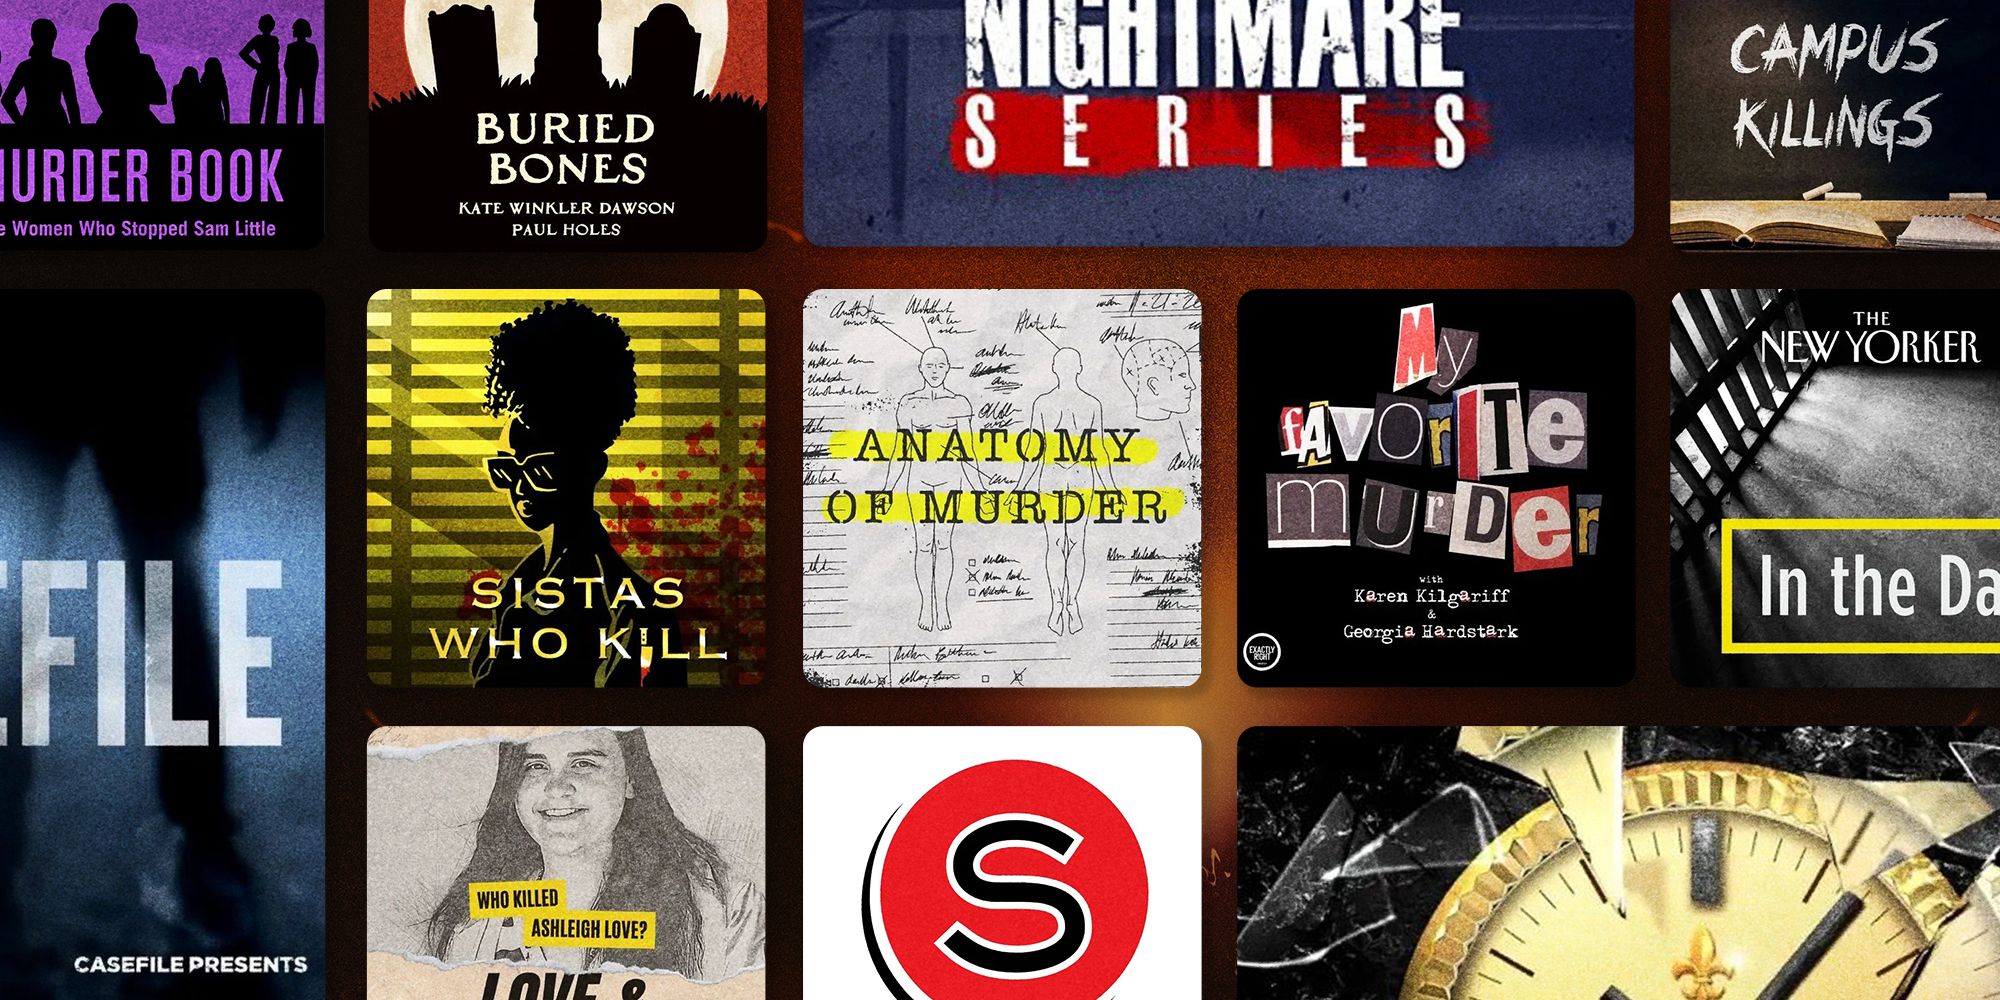 <p>Overwhelmed by the number of true crime podcasts out there? There are differences between them. Some shows take a full season to explore the nuances of one case, while others cover a new crime per episode. There are podcasts seeking answers in ongoing mysteries and shows that break down how authorities handled cases. </p><p>Some hosts take advantage of their experiences as investigative journalists, criminologists, or former law enforcement officials. Breezier hosts use tasteful humor as they discuss true crime. Others harness their own experiences to connect to cases and victims.</p><p>We found the 15 best true crime podcasts out there so you can find the right one for you.</p><p class="body-tip">More True Crime: <a href="https://www.biography.com/crime/menendez-brothers-murder-case-facts">Why the Menendez Brothers Killed Their Parents</a> • <a href="https://www.biography.com/crime/a44602573/where-is-anna-delvey-today">Where Is Anna Delvey Now?</a> • <a href="https://www.biography.com/crime/elizabeth-holmes-theranos-scam">Inside Elizabeth Holmes' Downfall at Theranos</a></p>